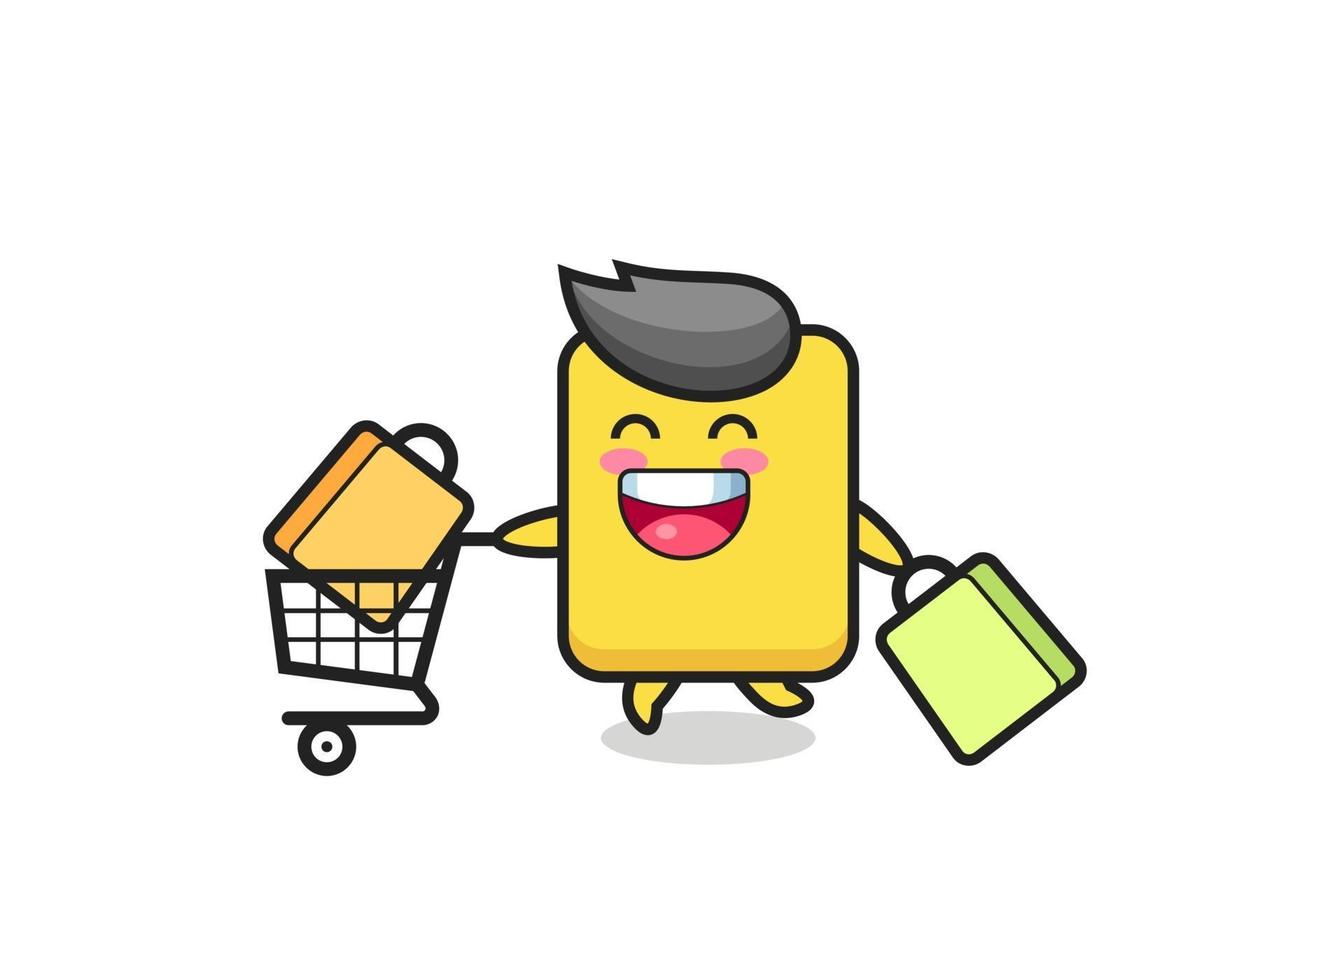 black Friday illustration with cute yellow card mascot vector